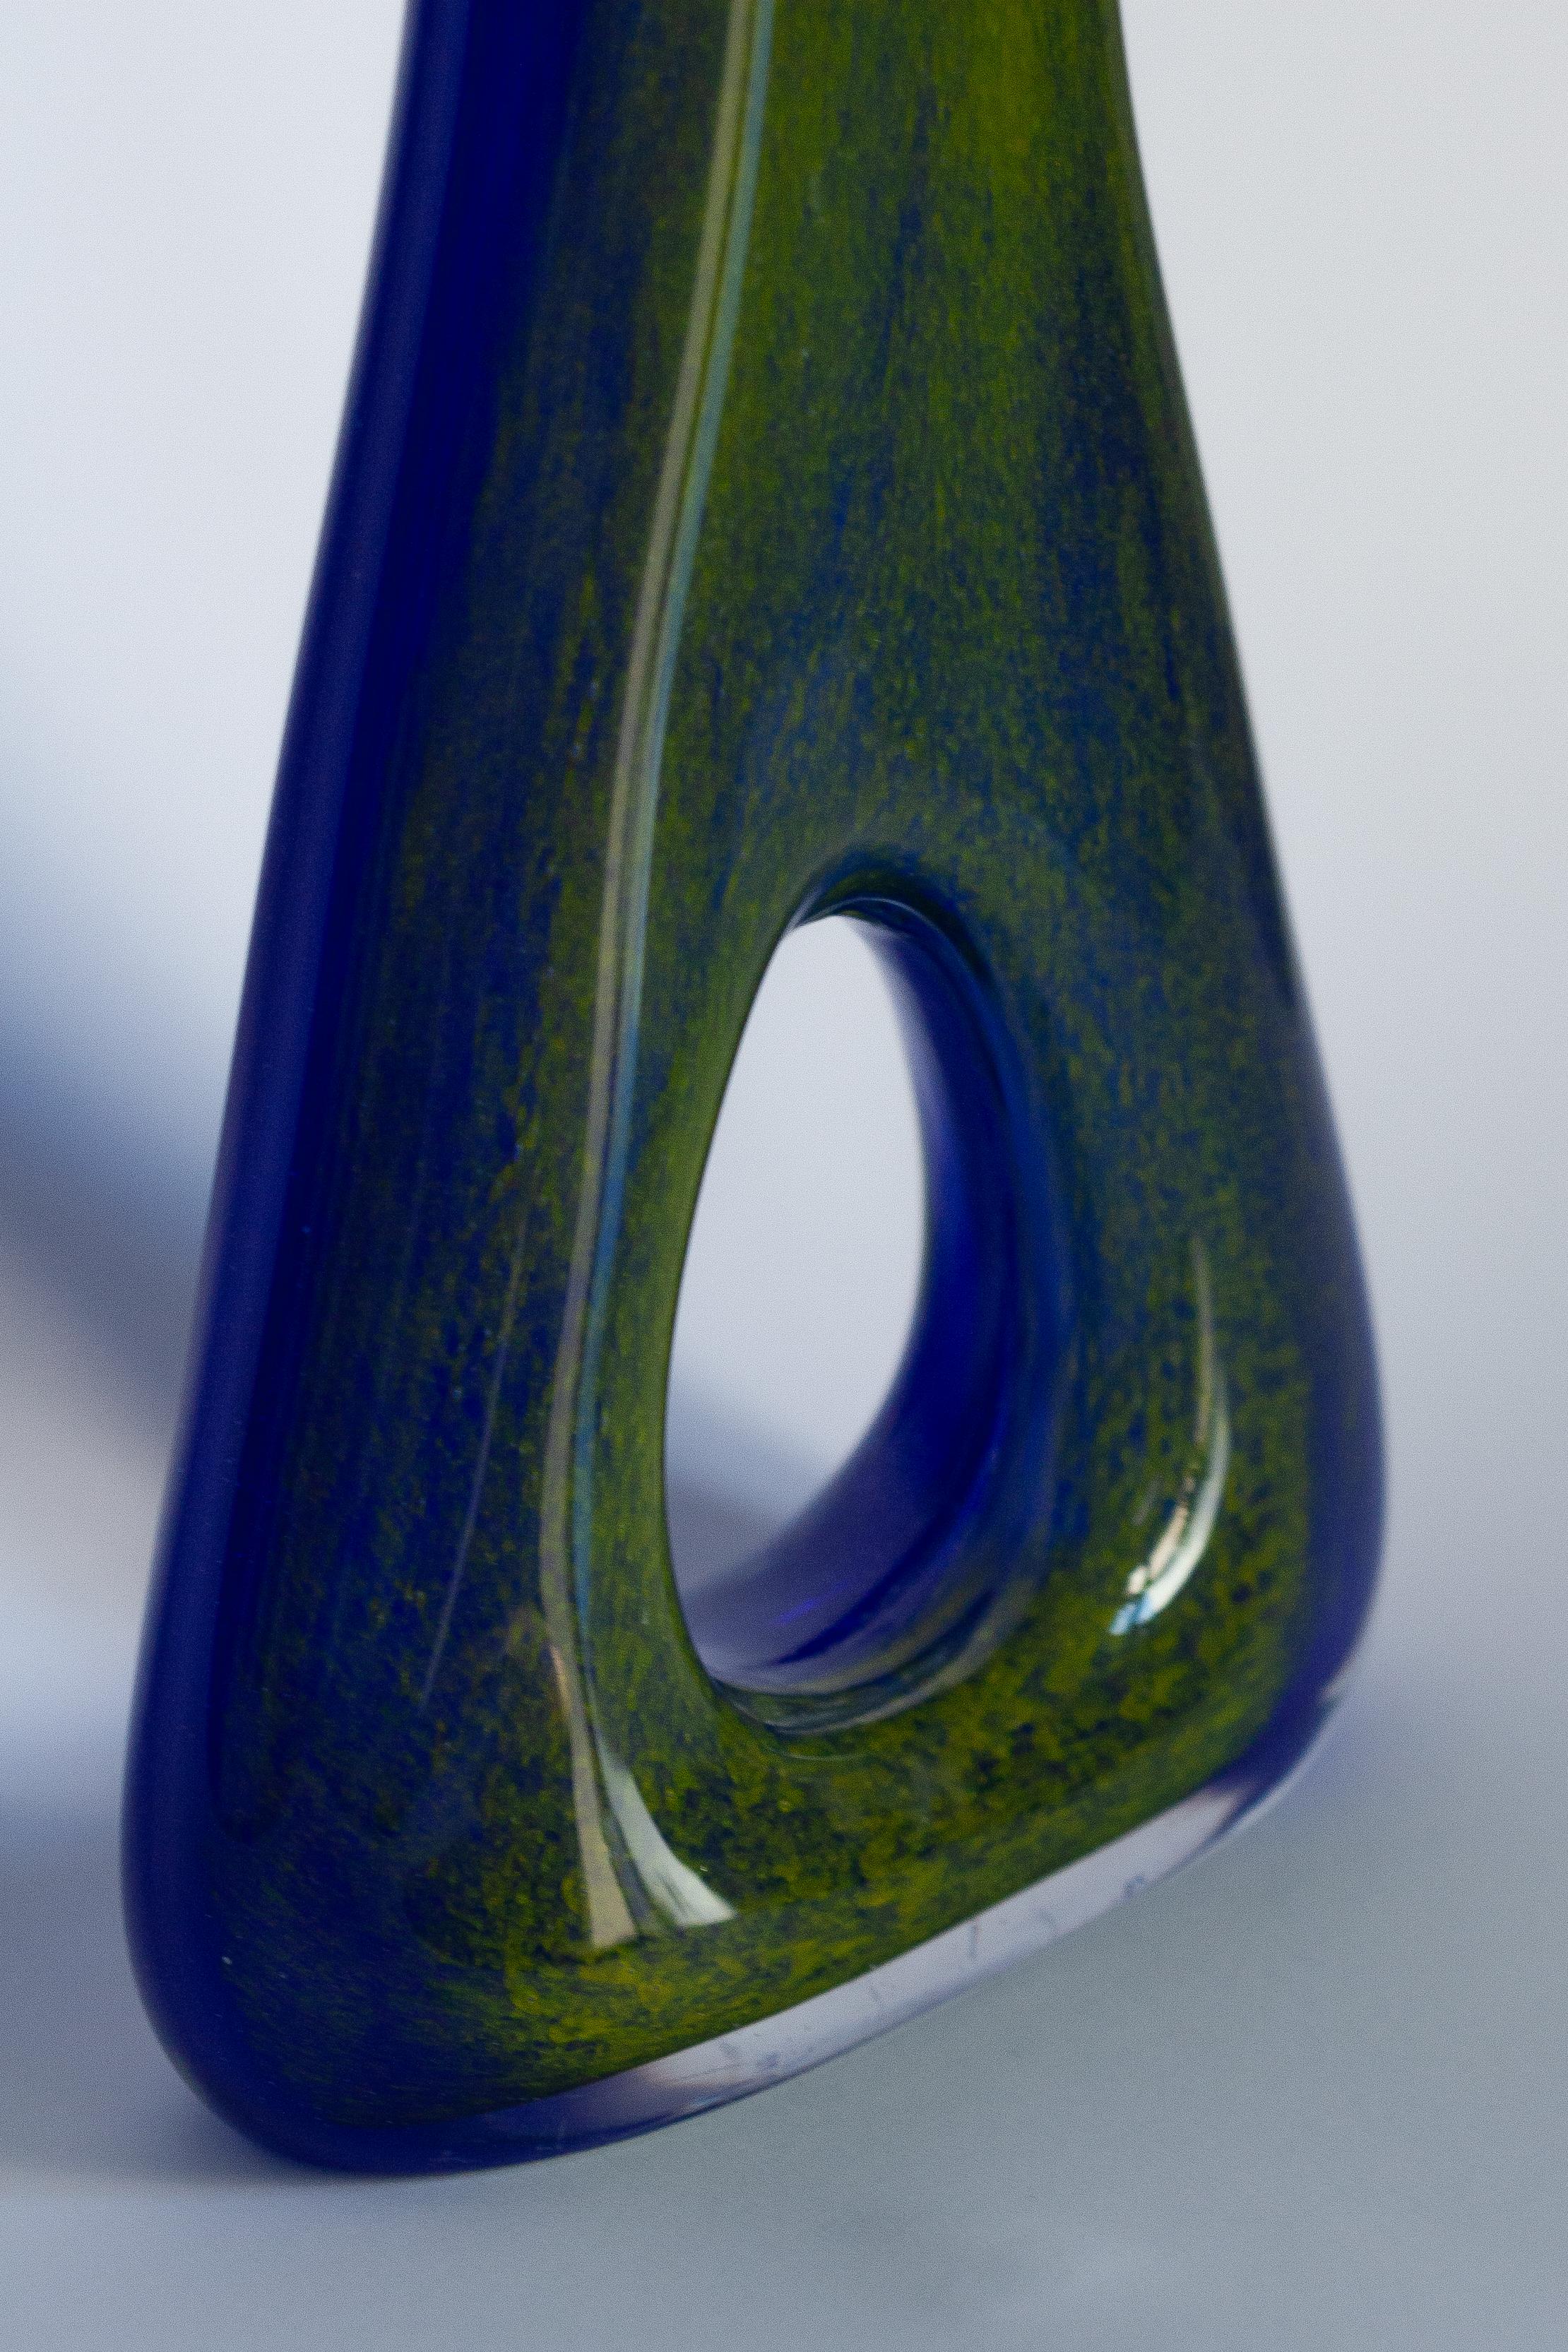 Glass Mid Century Ultramarine Blue and Yellow Artistic Vase, Europe, 1960s For Sale